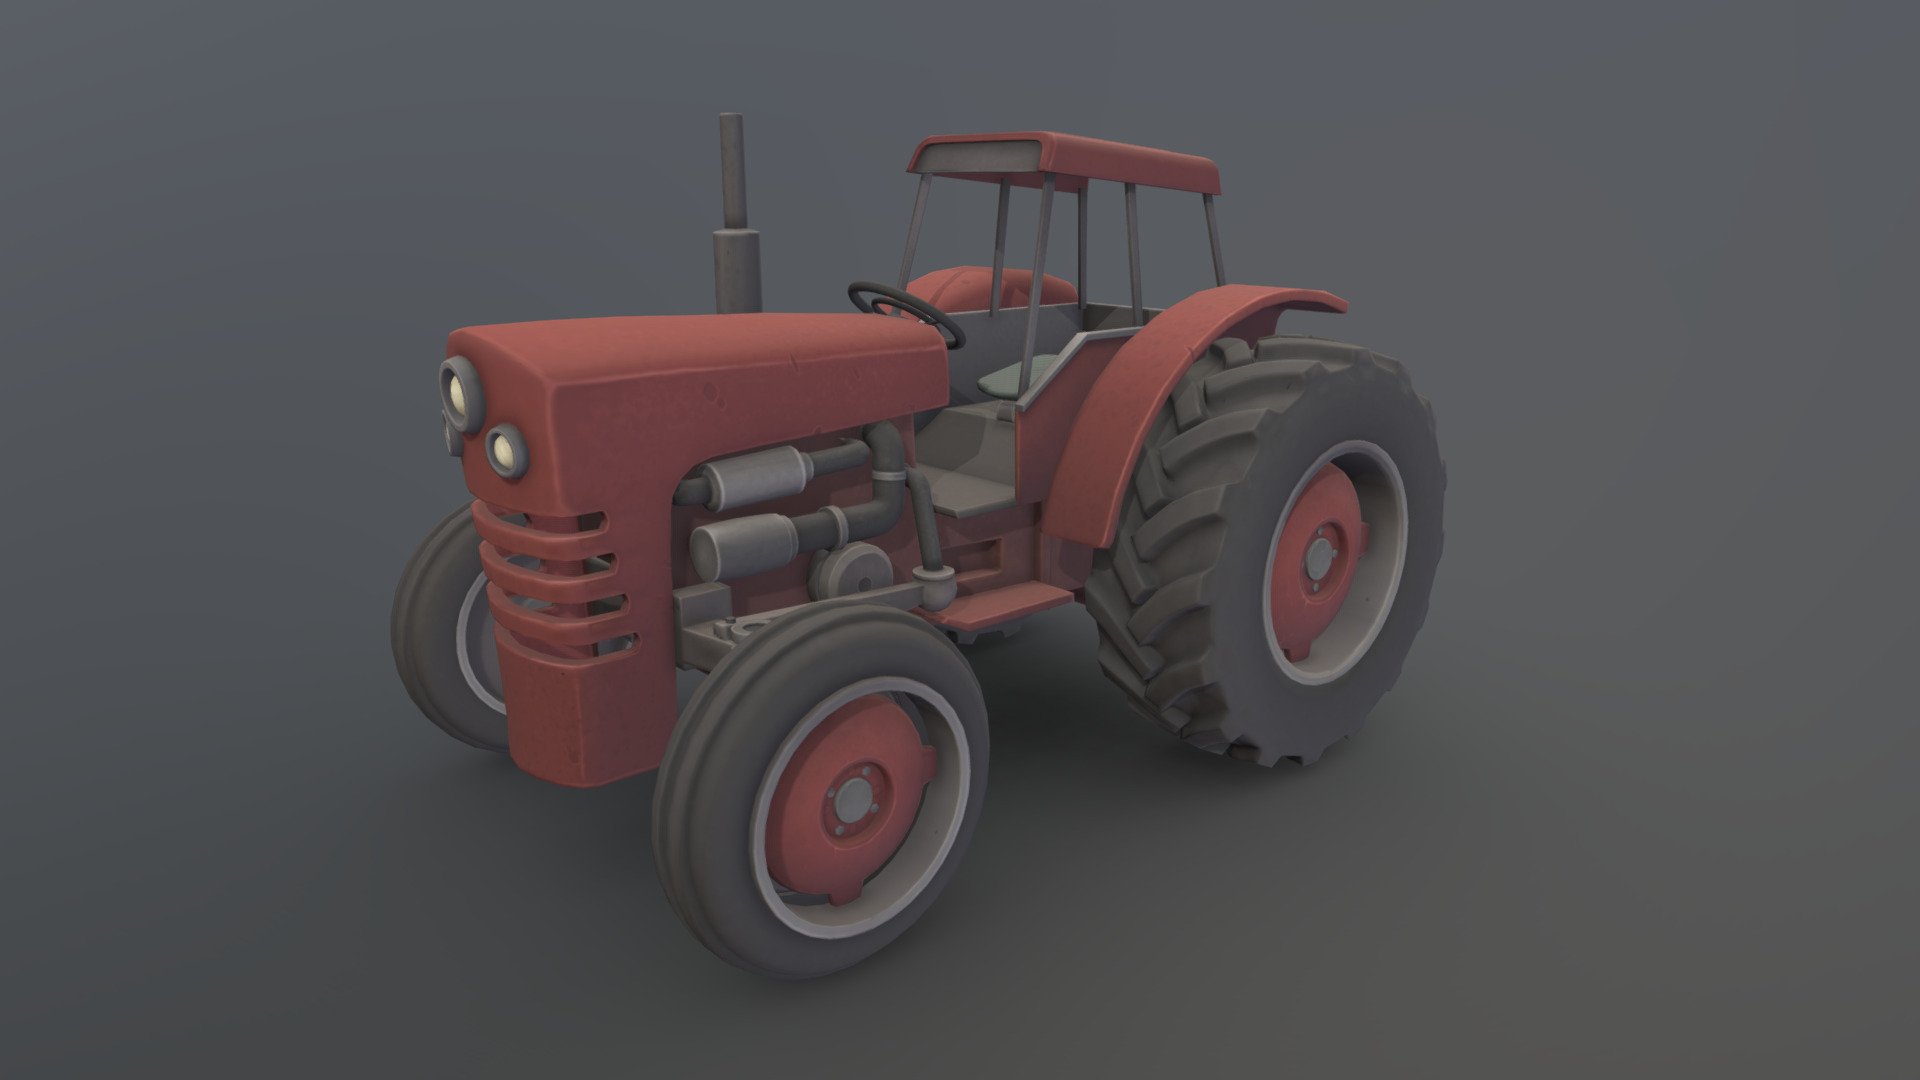 Hand painted, low poy tractor. Modelled in Blender, textured in Photoshop and Substance Painter 3d model